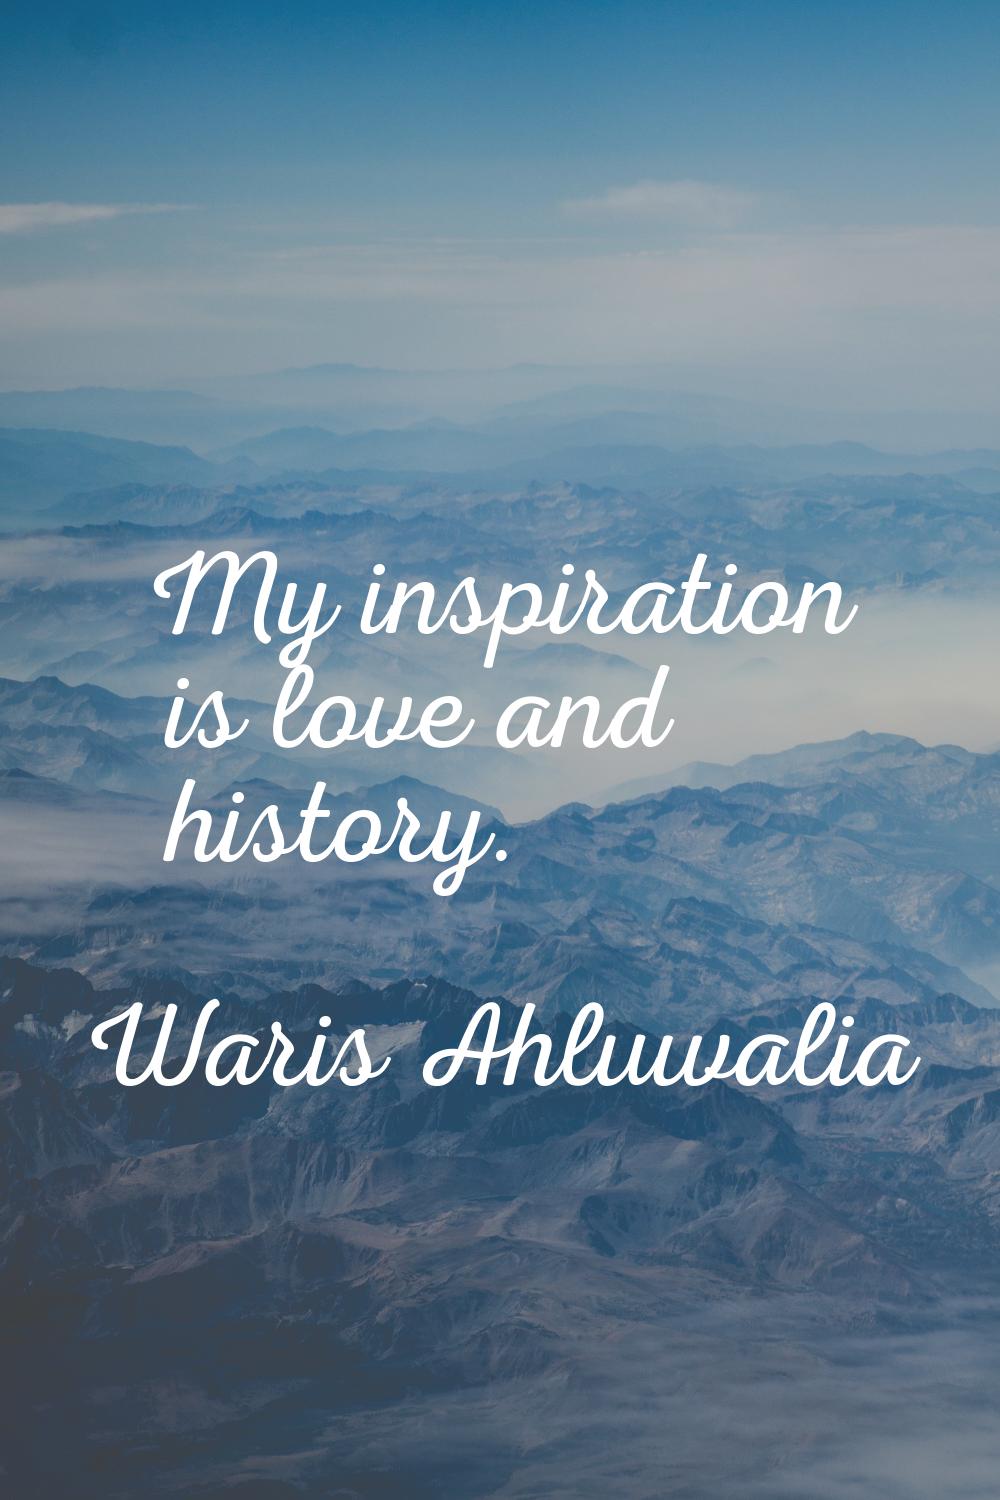 My inspiration is love and history.